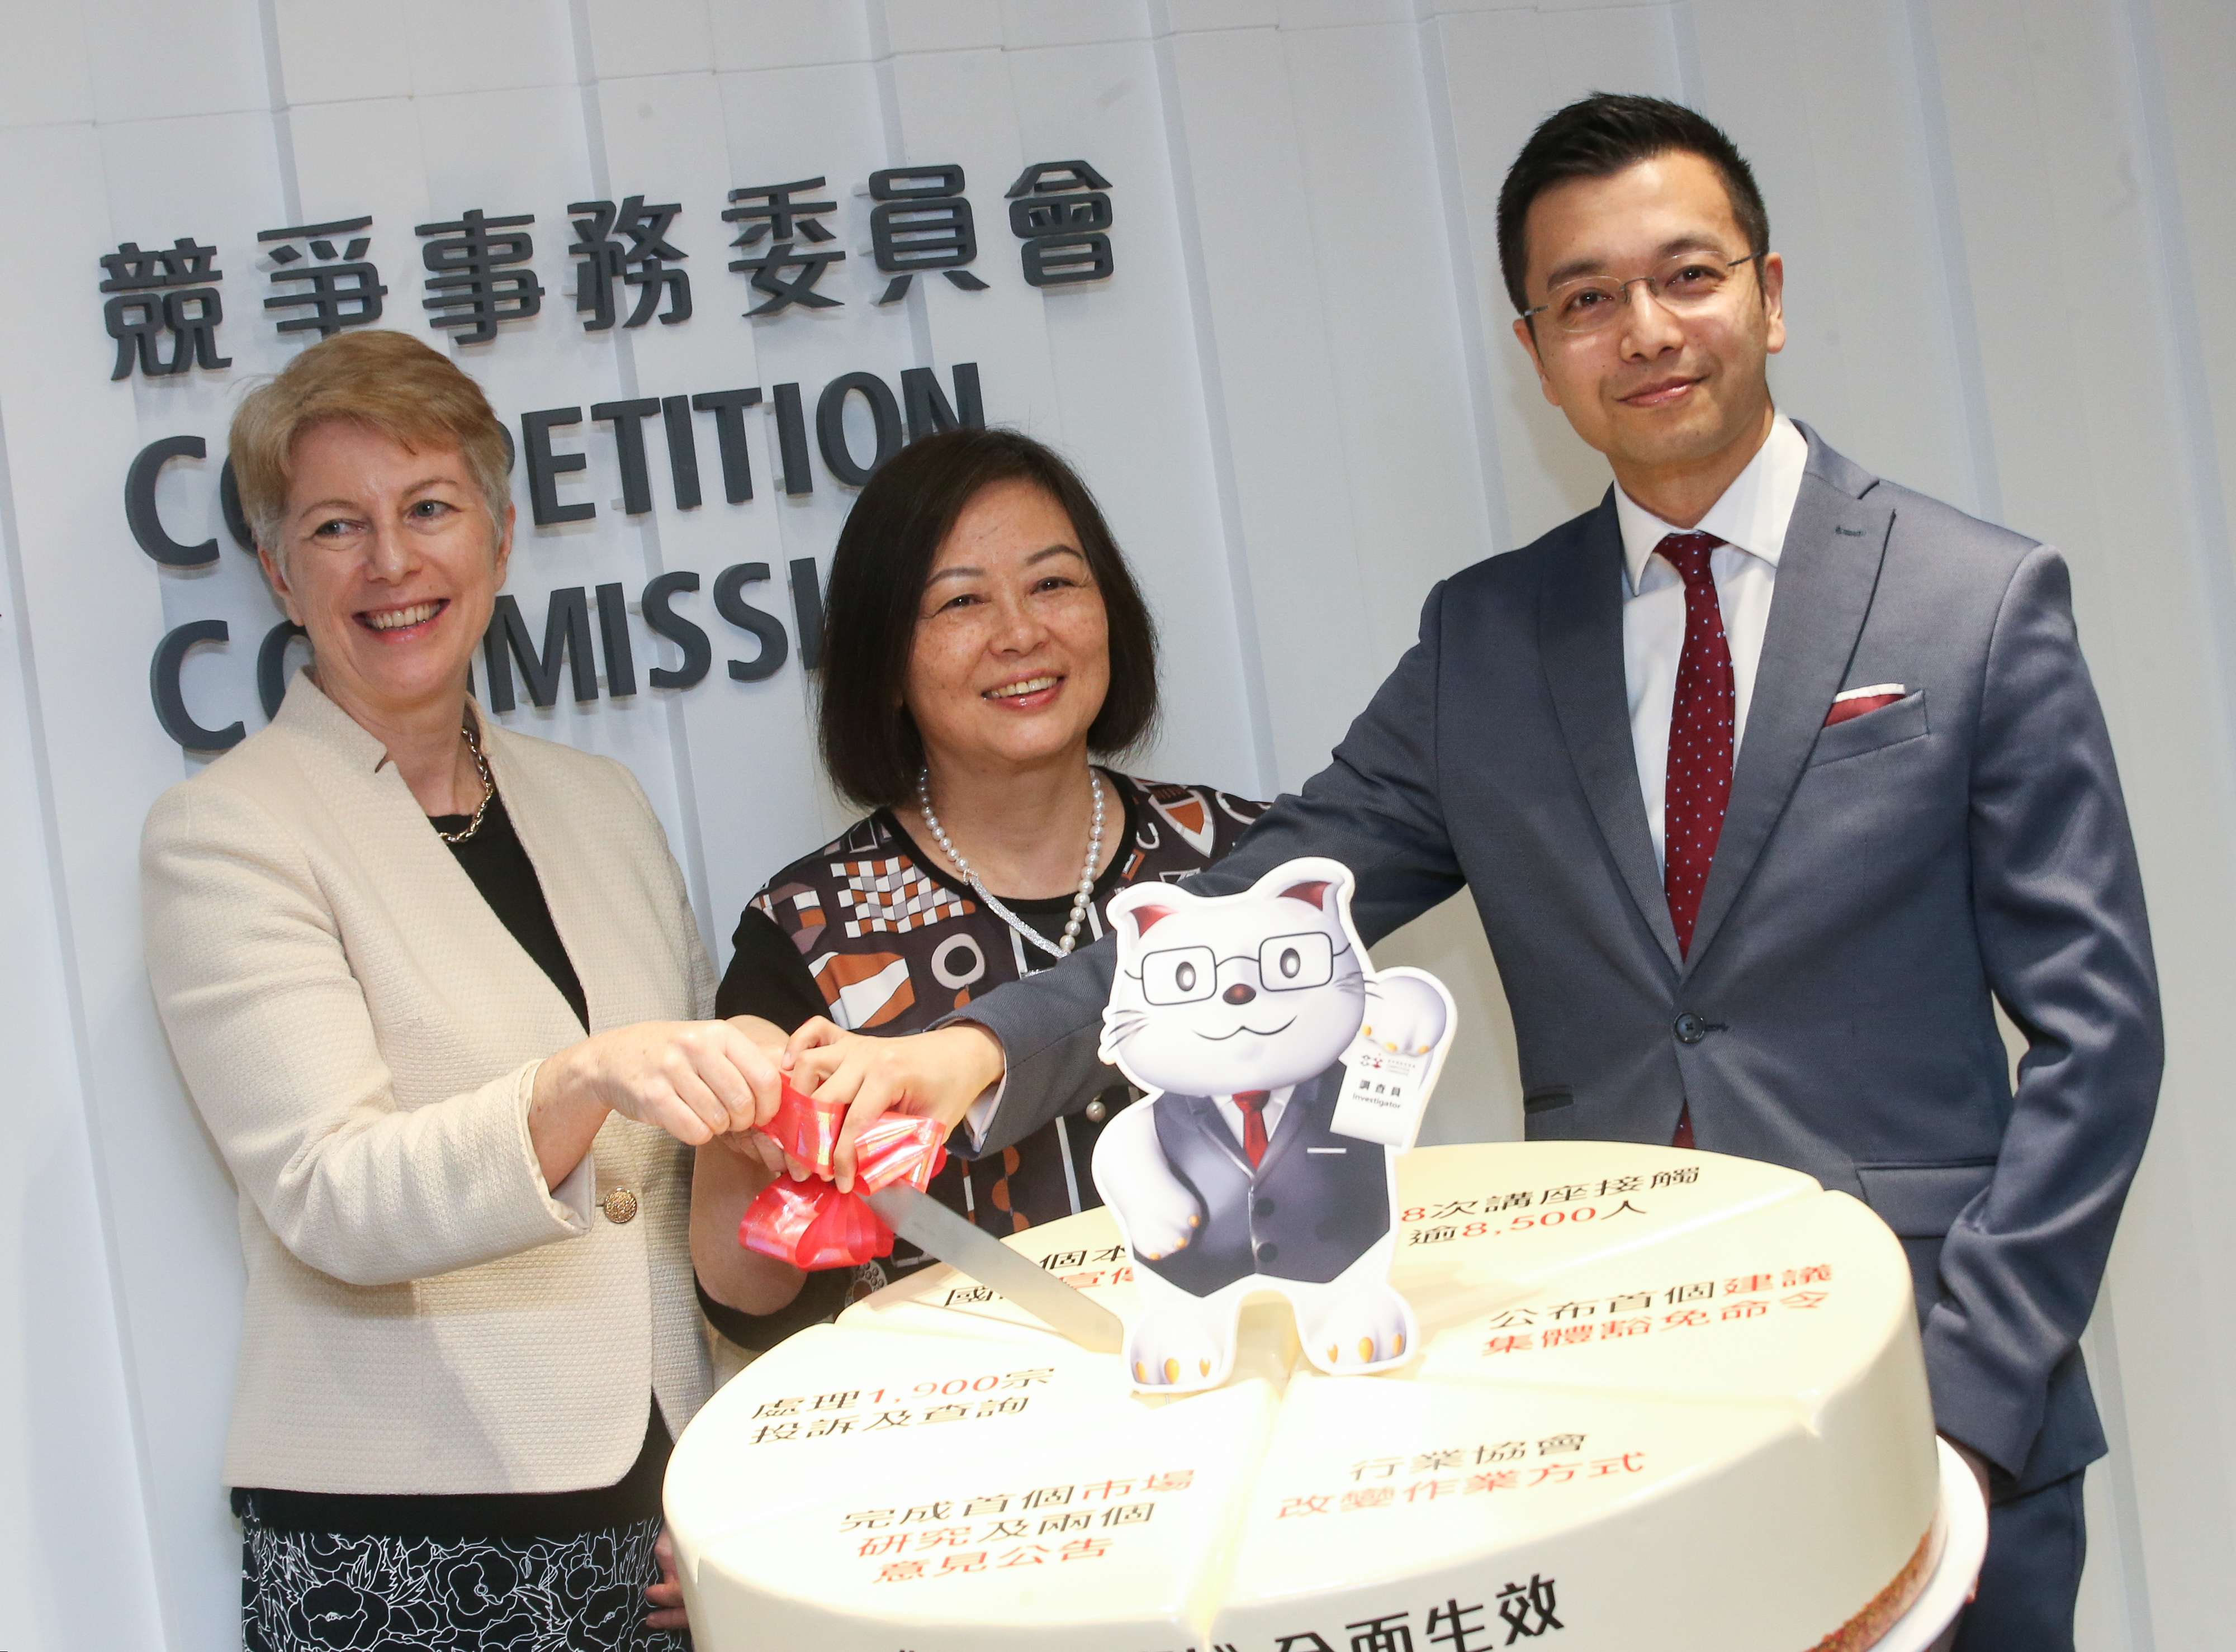 Rose Webb, Anna Wu and commission senior executive director Rasul Butt celebrate the first anniversary of the Competition Ordinance coming into full effect. Photo: David Wong